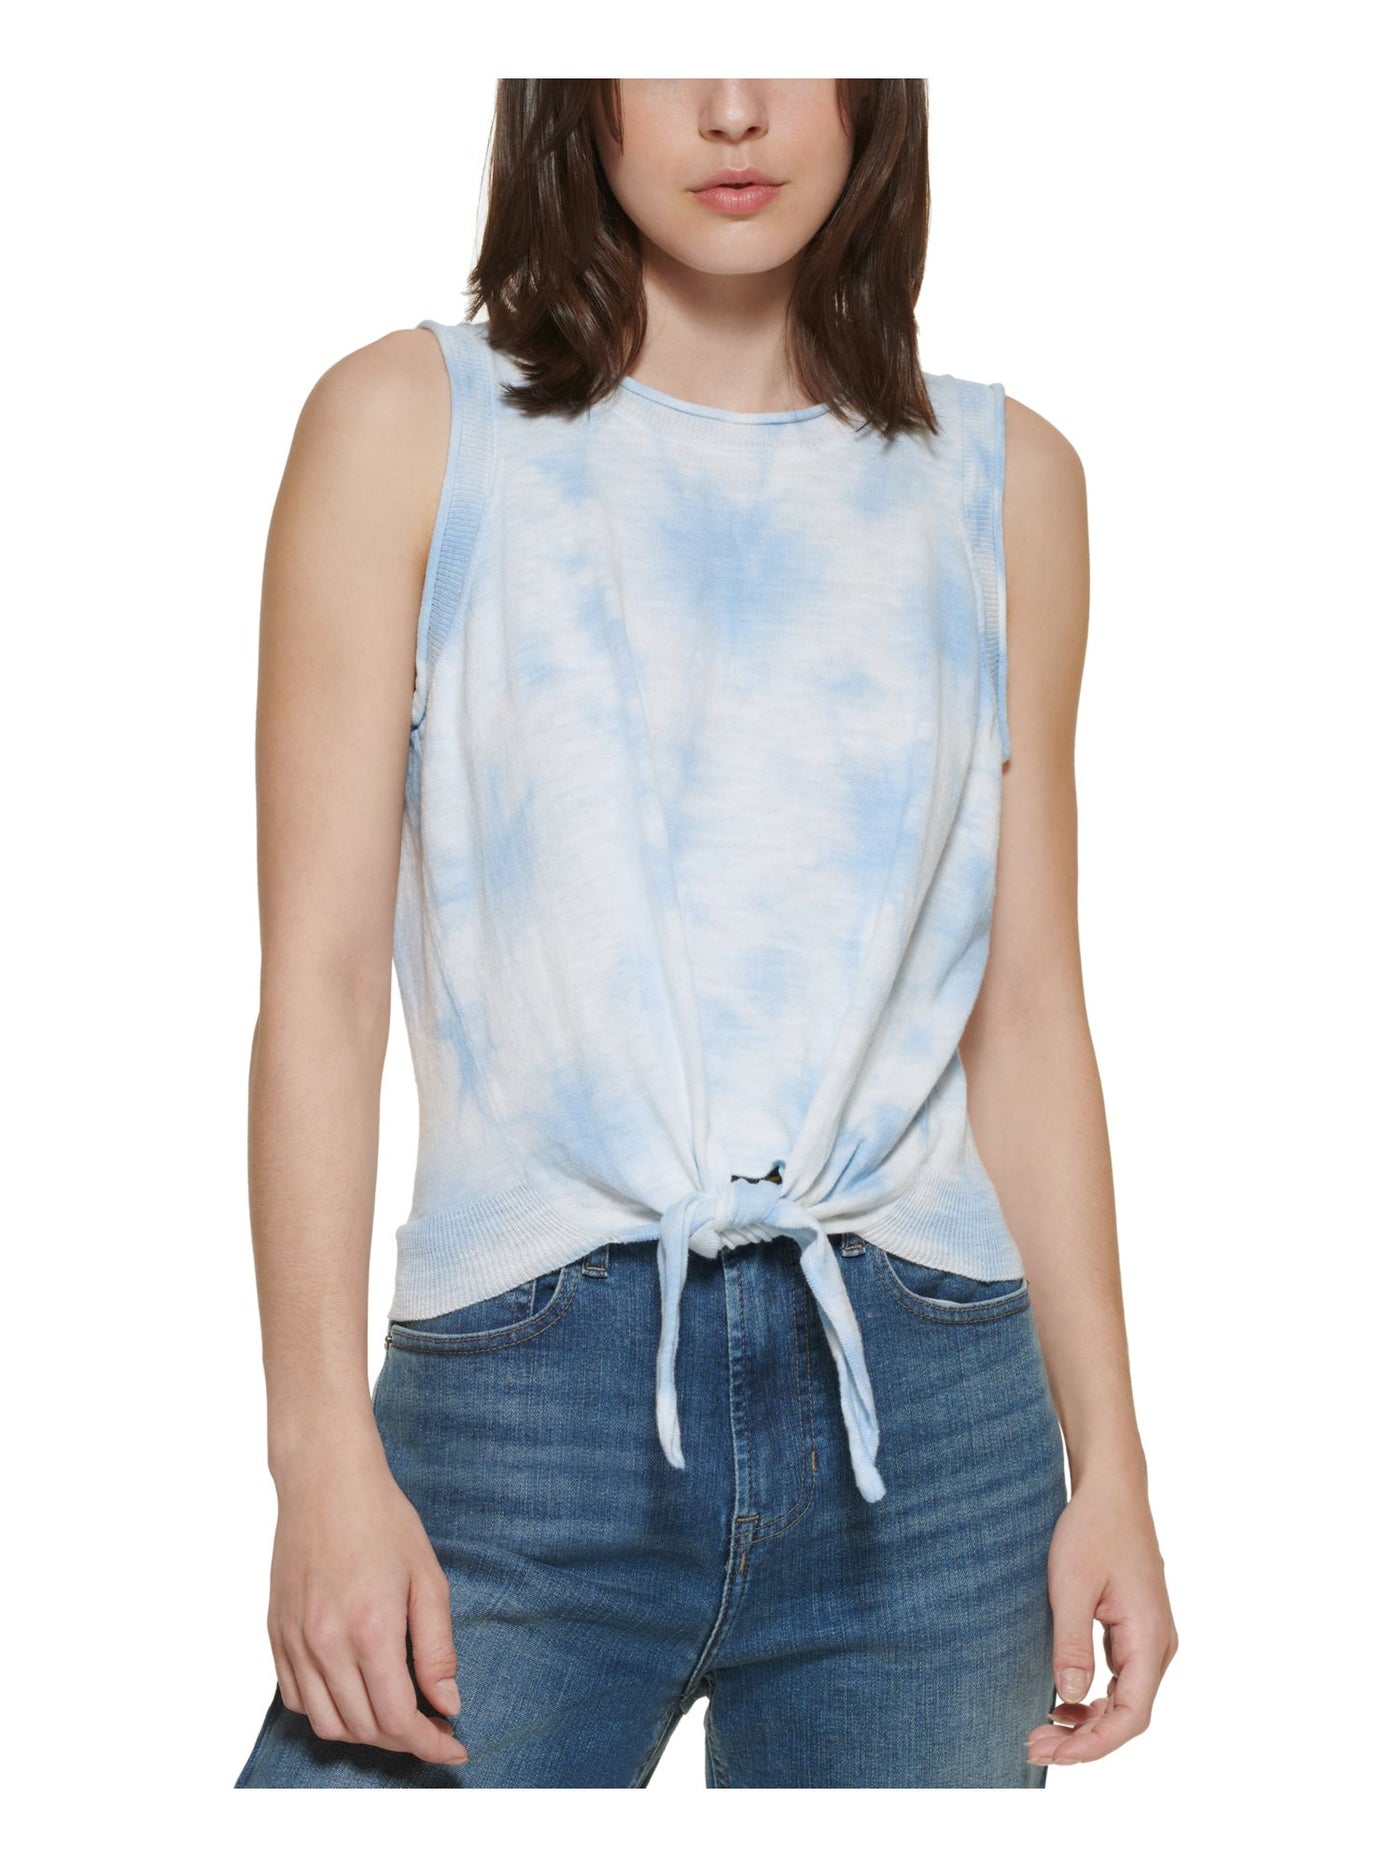 DKNY JEANS Womens Light Blue Ribbed Tie Front Pullover Tie Dye Sleeveless Crew Neck Tank Top L